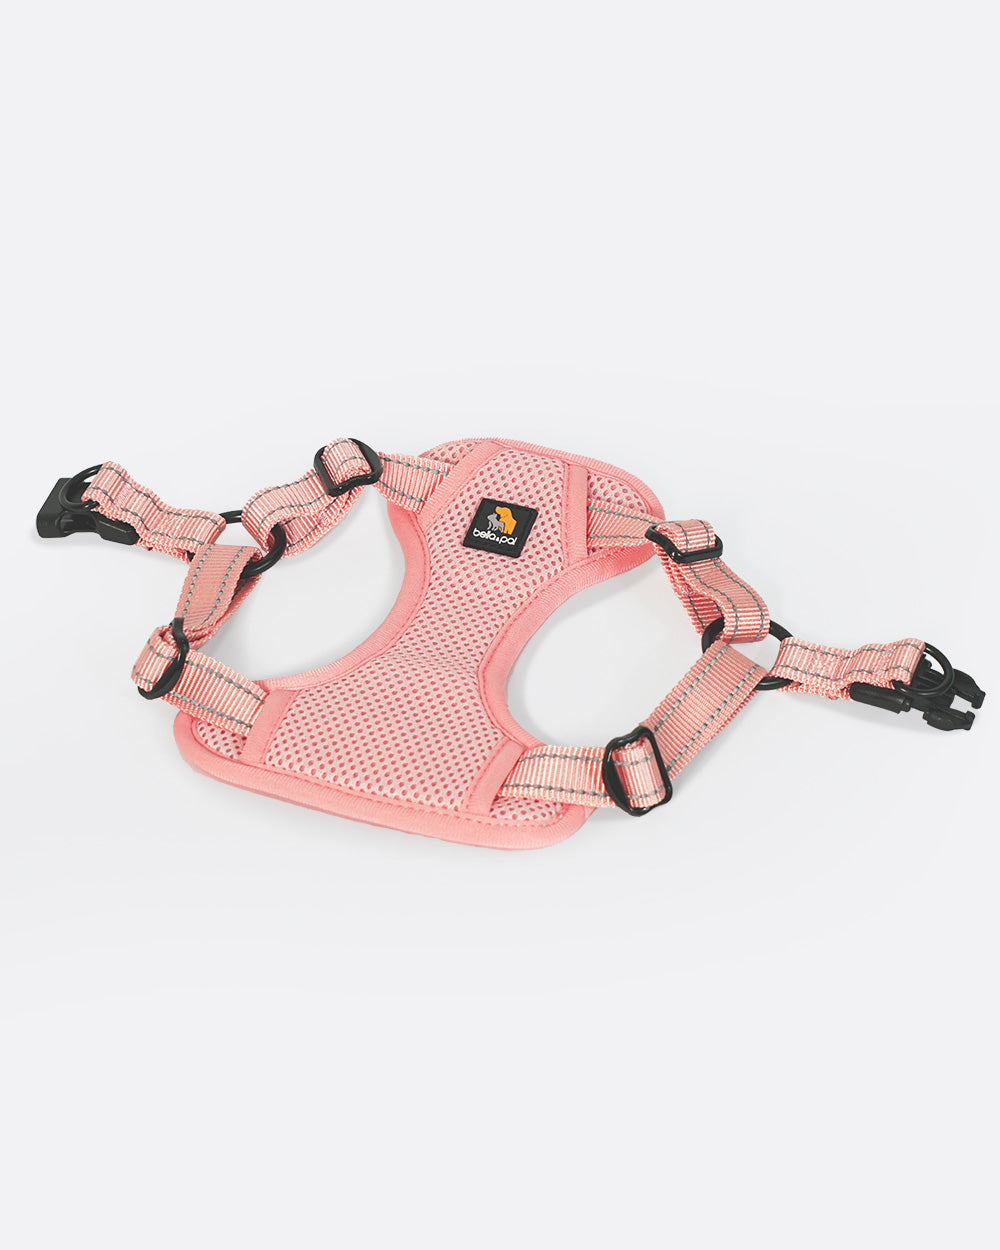 OxyMesh Flexi Step-in Harness and Leash Set - Coral Pink